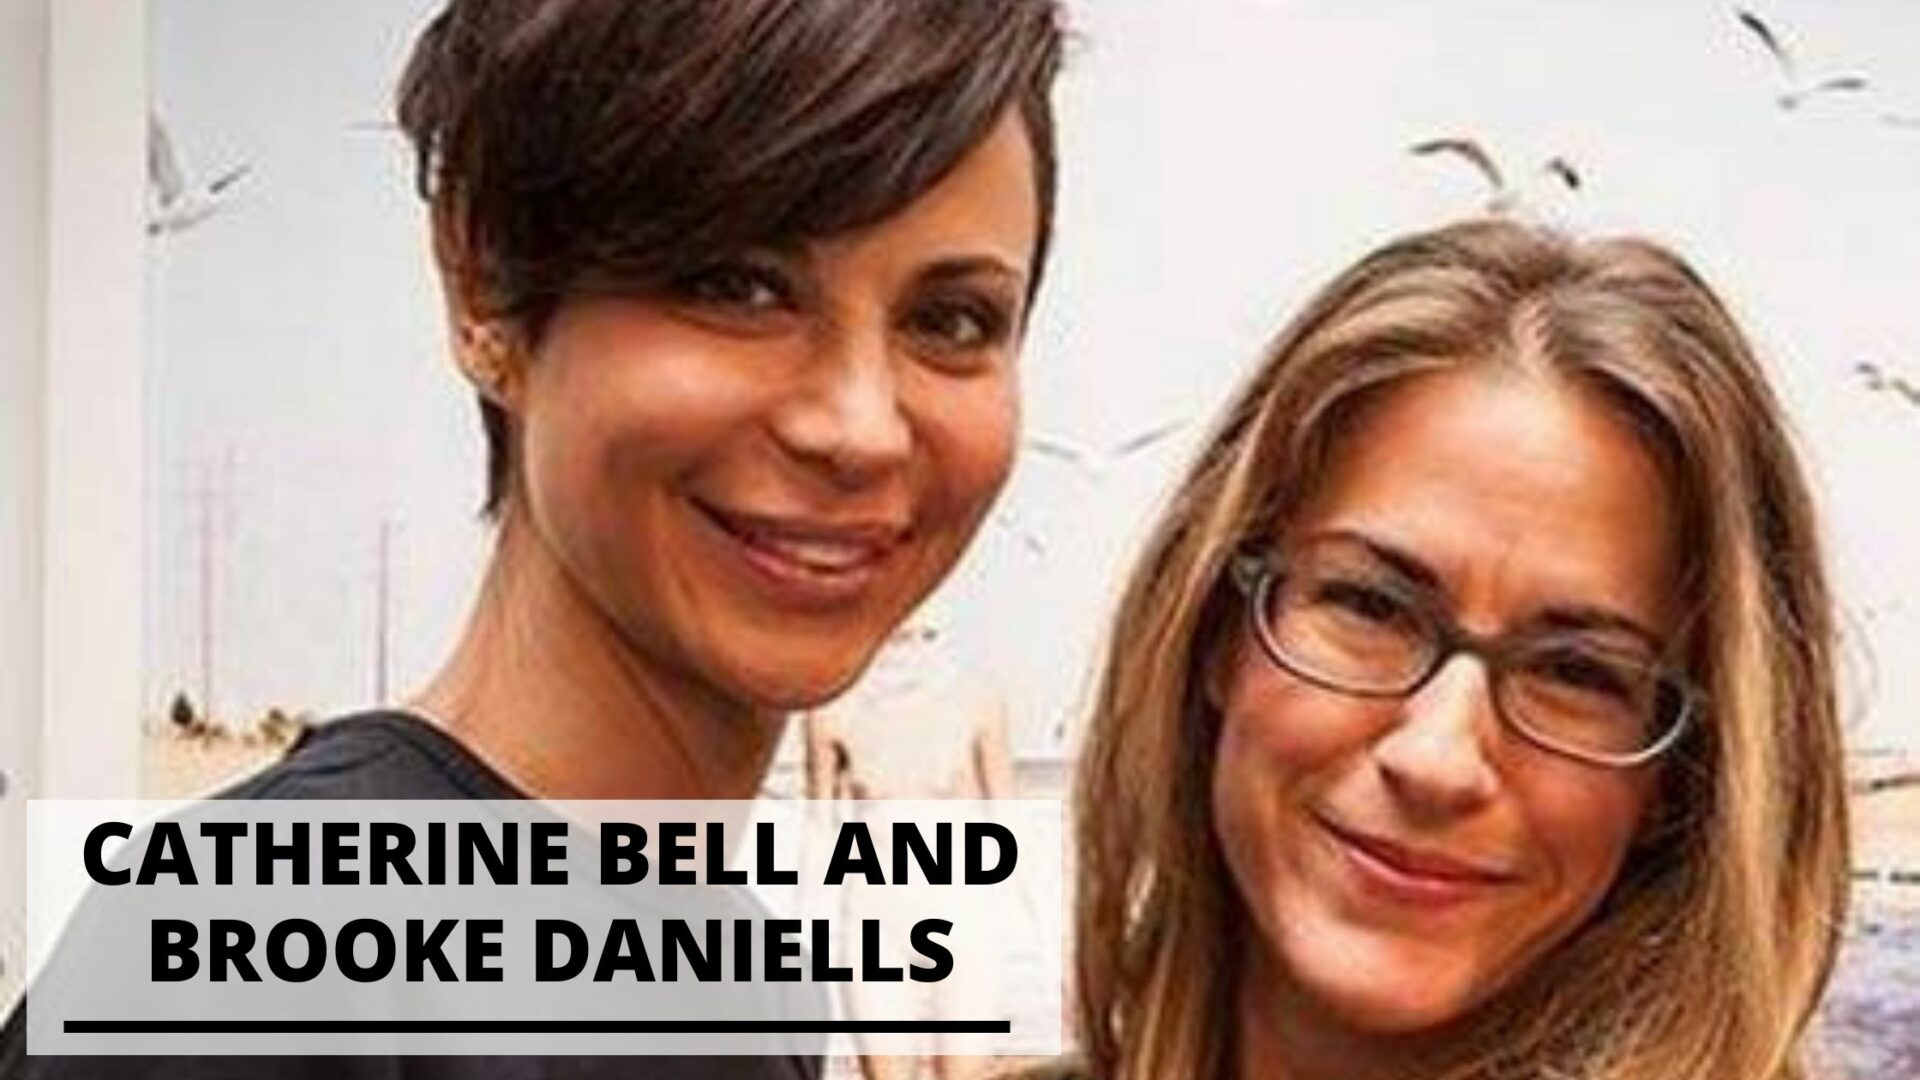 Get to Know Brooke Daniells and Catherine Bell